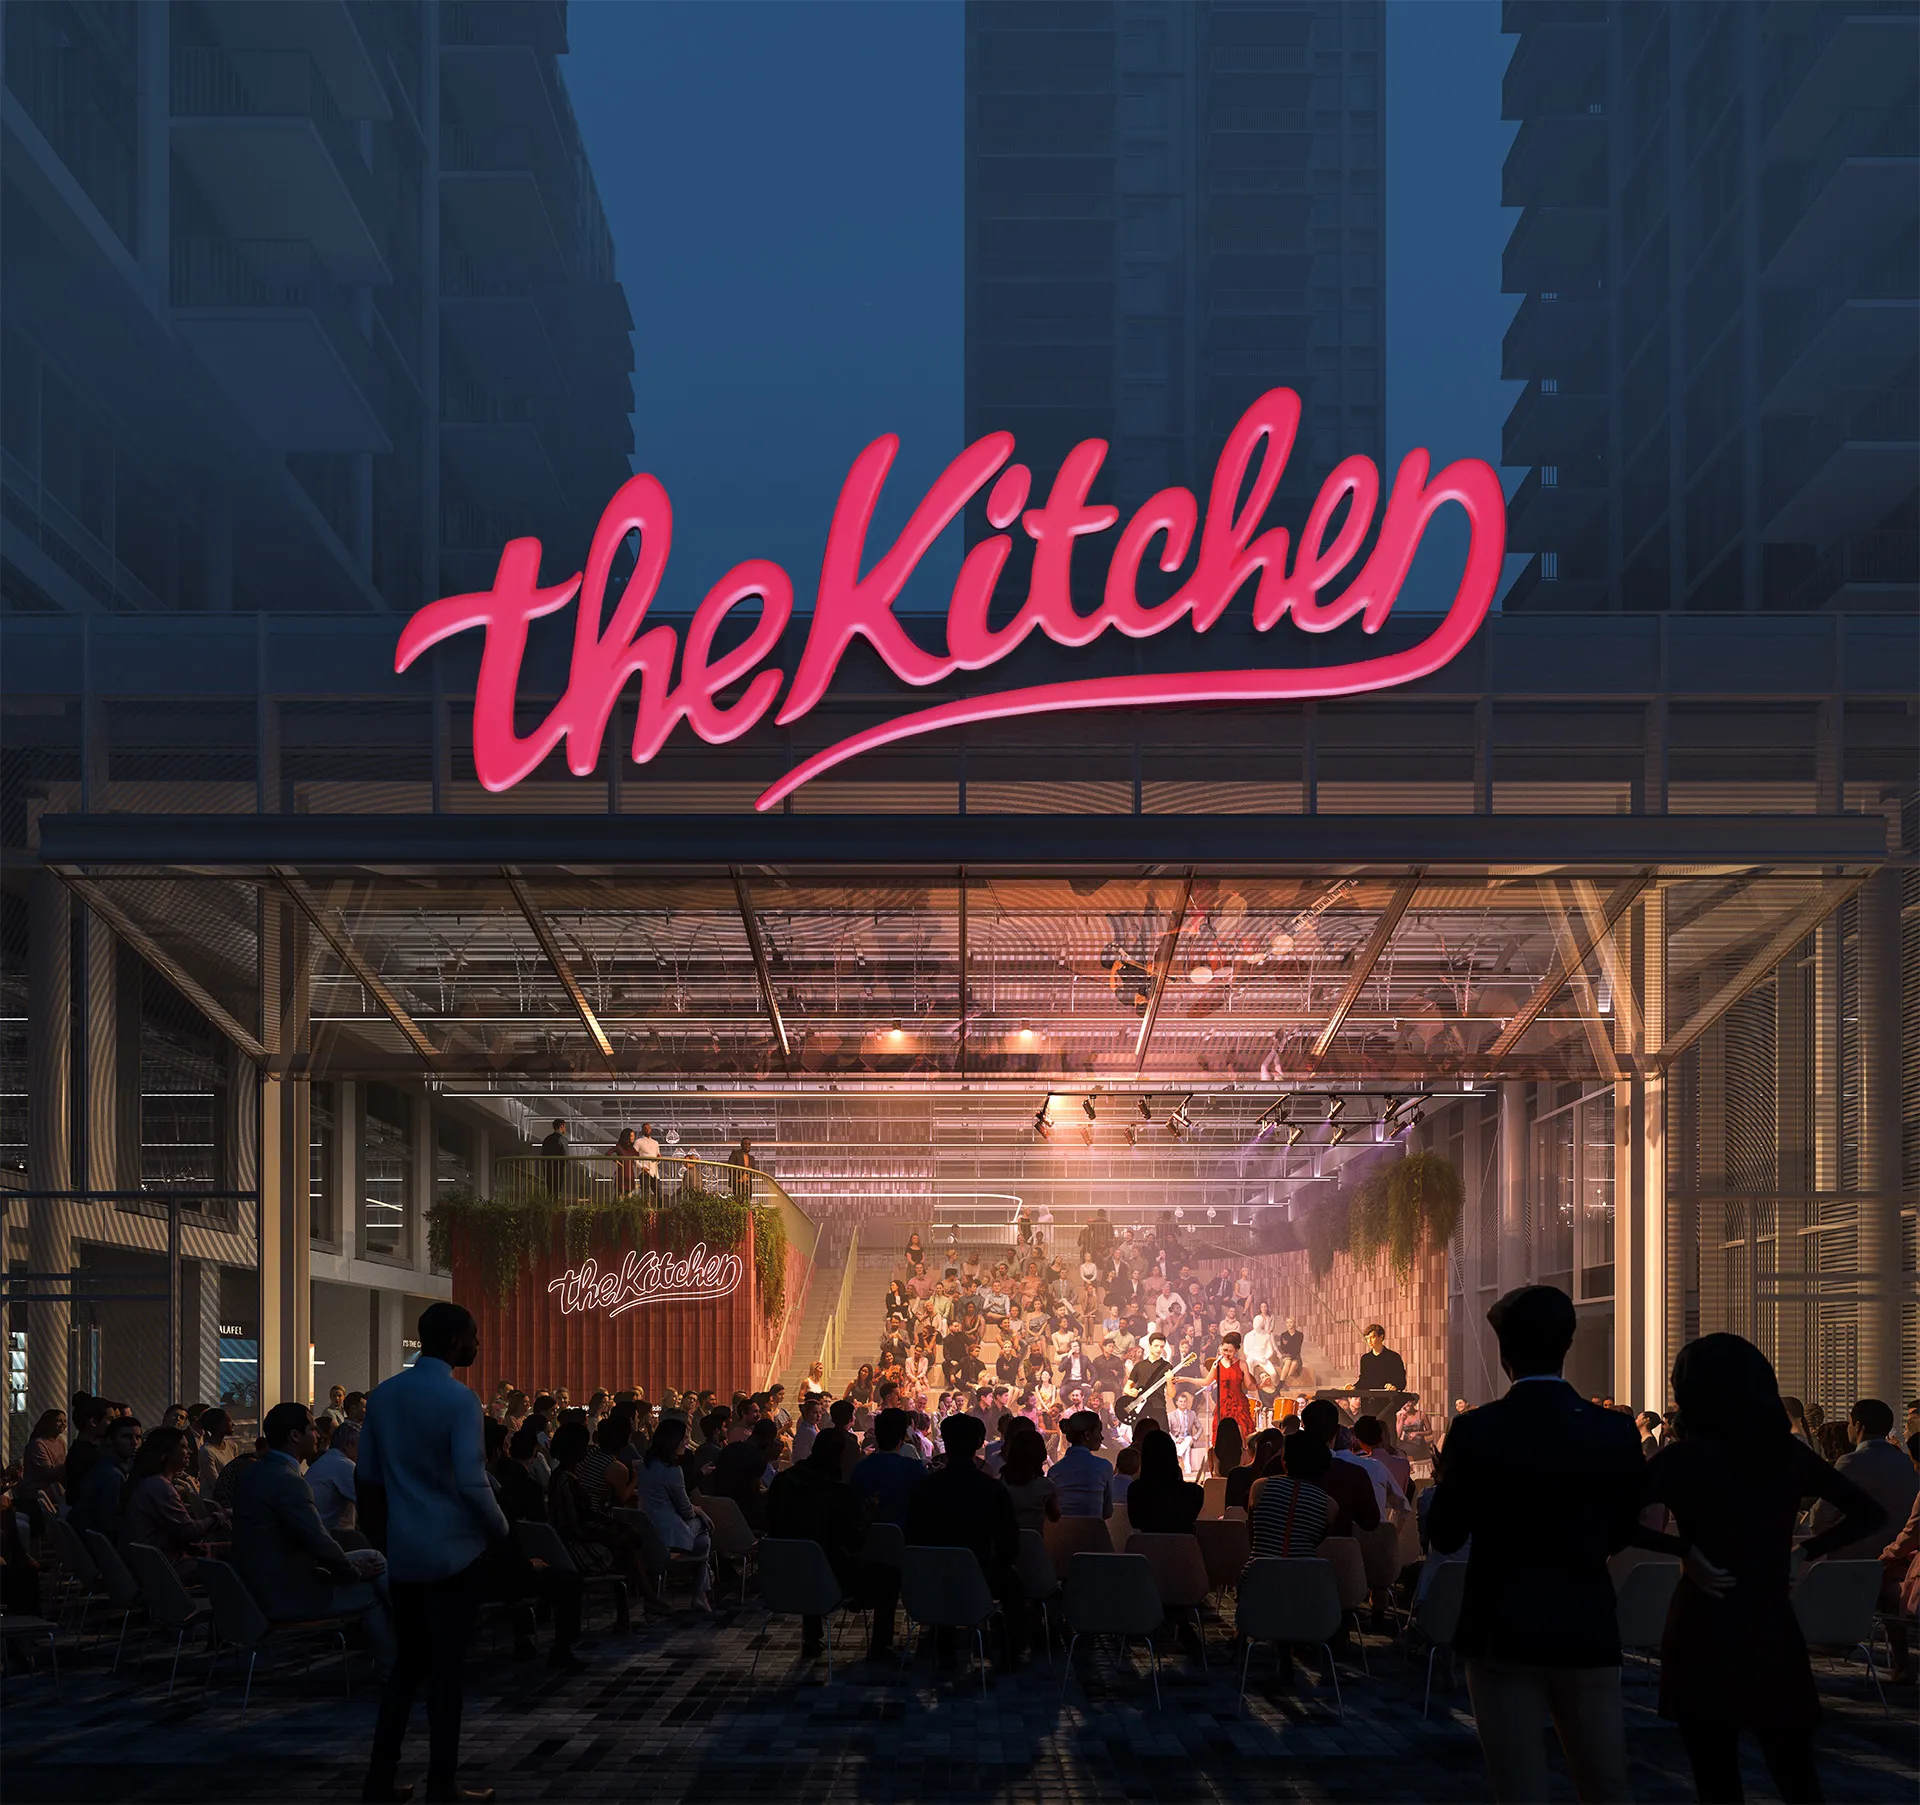 Image of The Kitchen which is one section of Mirvish Village